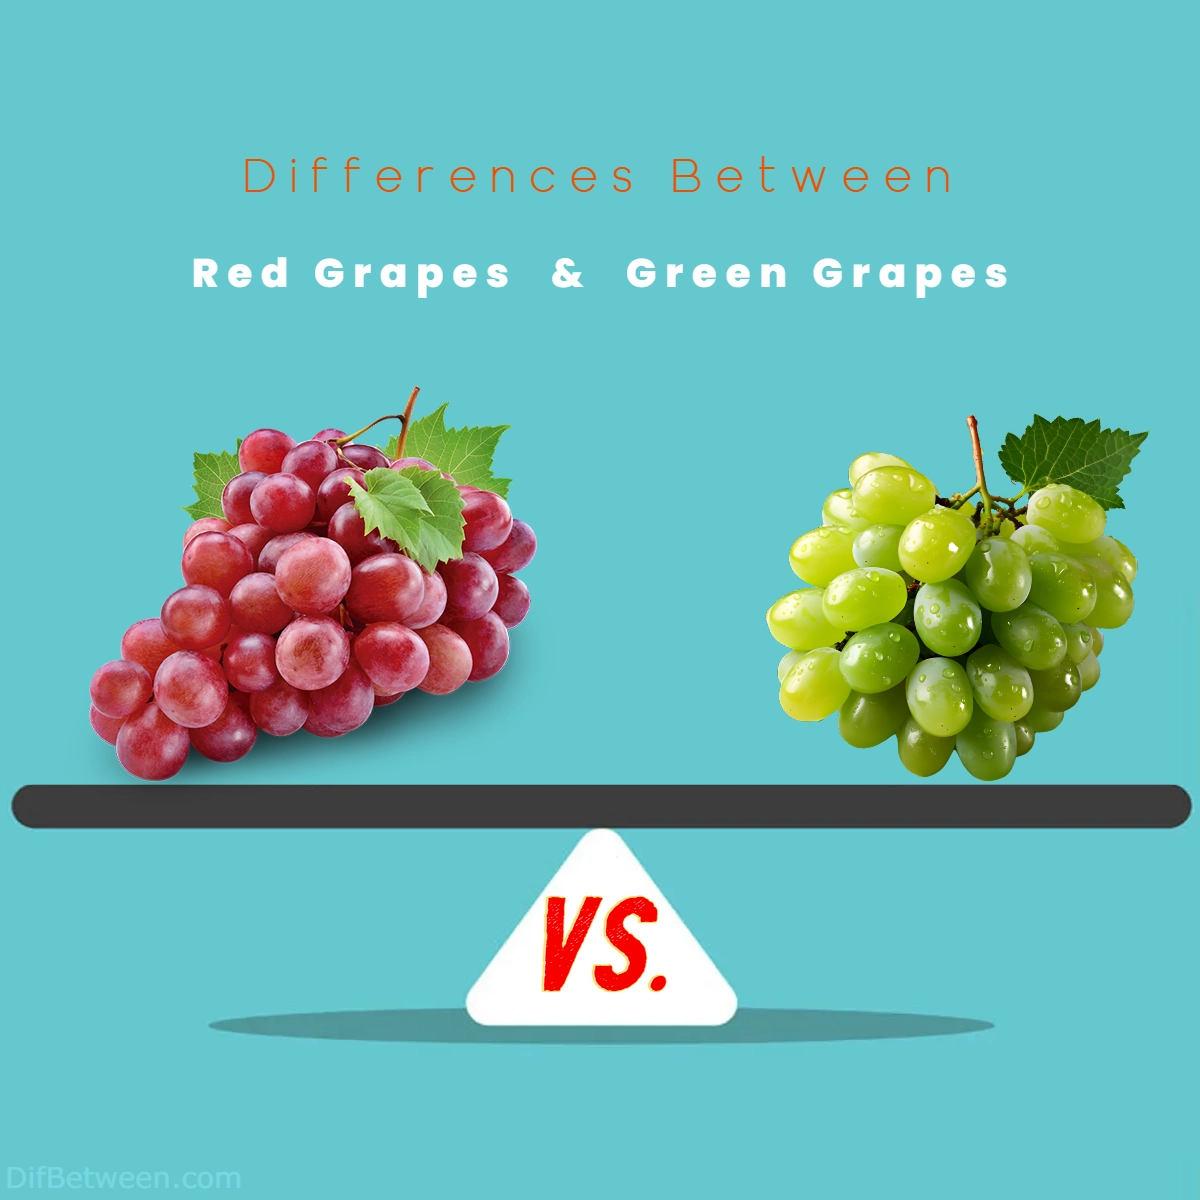 Difference Between Red Grapes and Green Grapes